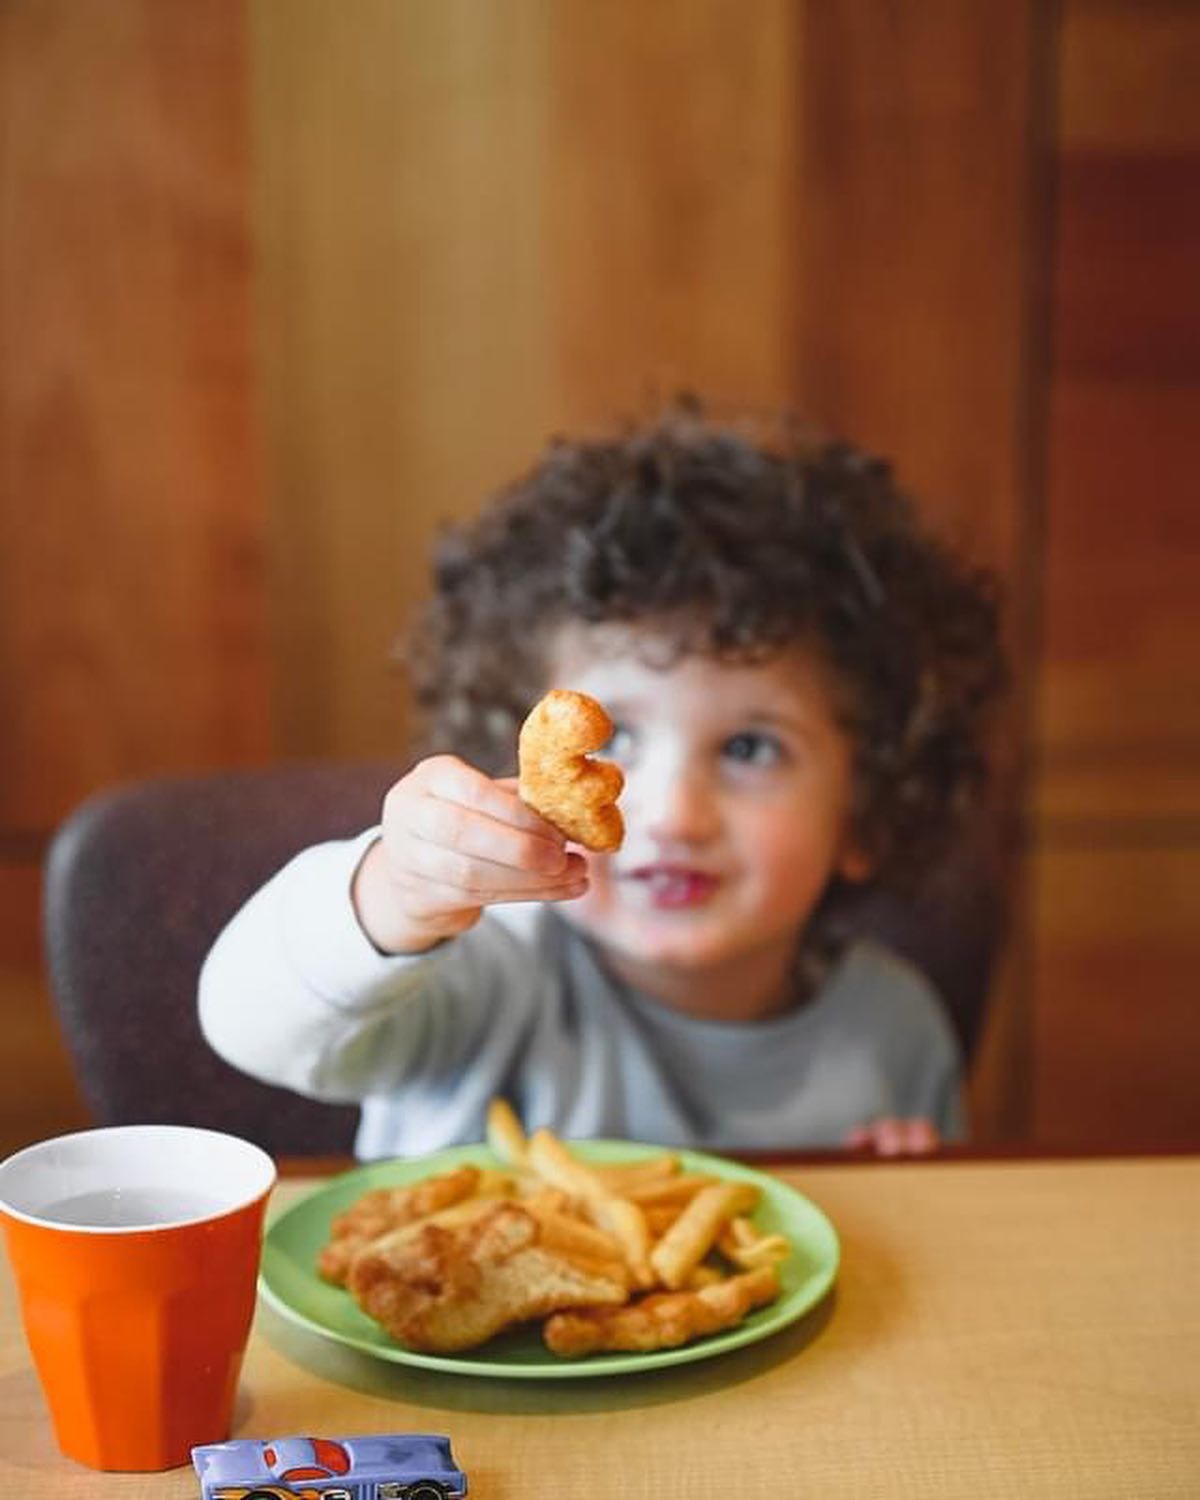 KIDS EAT FREE TONIGHT 👧👦

Looking for an easy Monday night feed? Enjoy one kids meal with every main meal and entertain the kids with our indoor playground 😋

Book here 👉 www.settlershotel.com